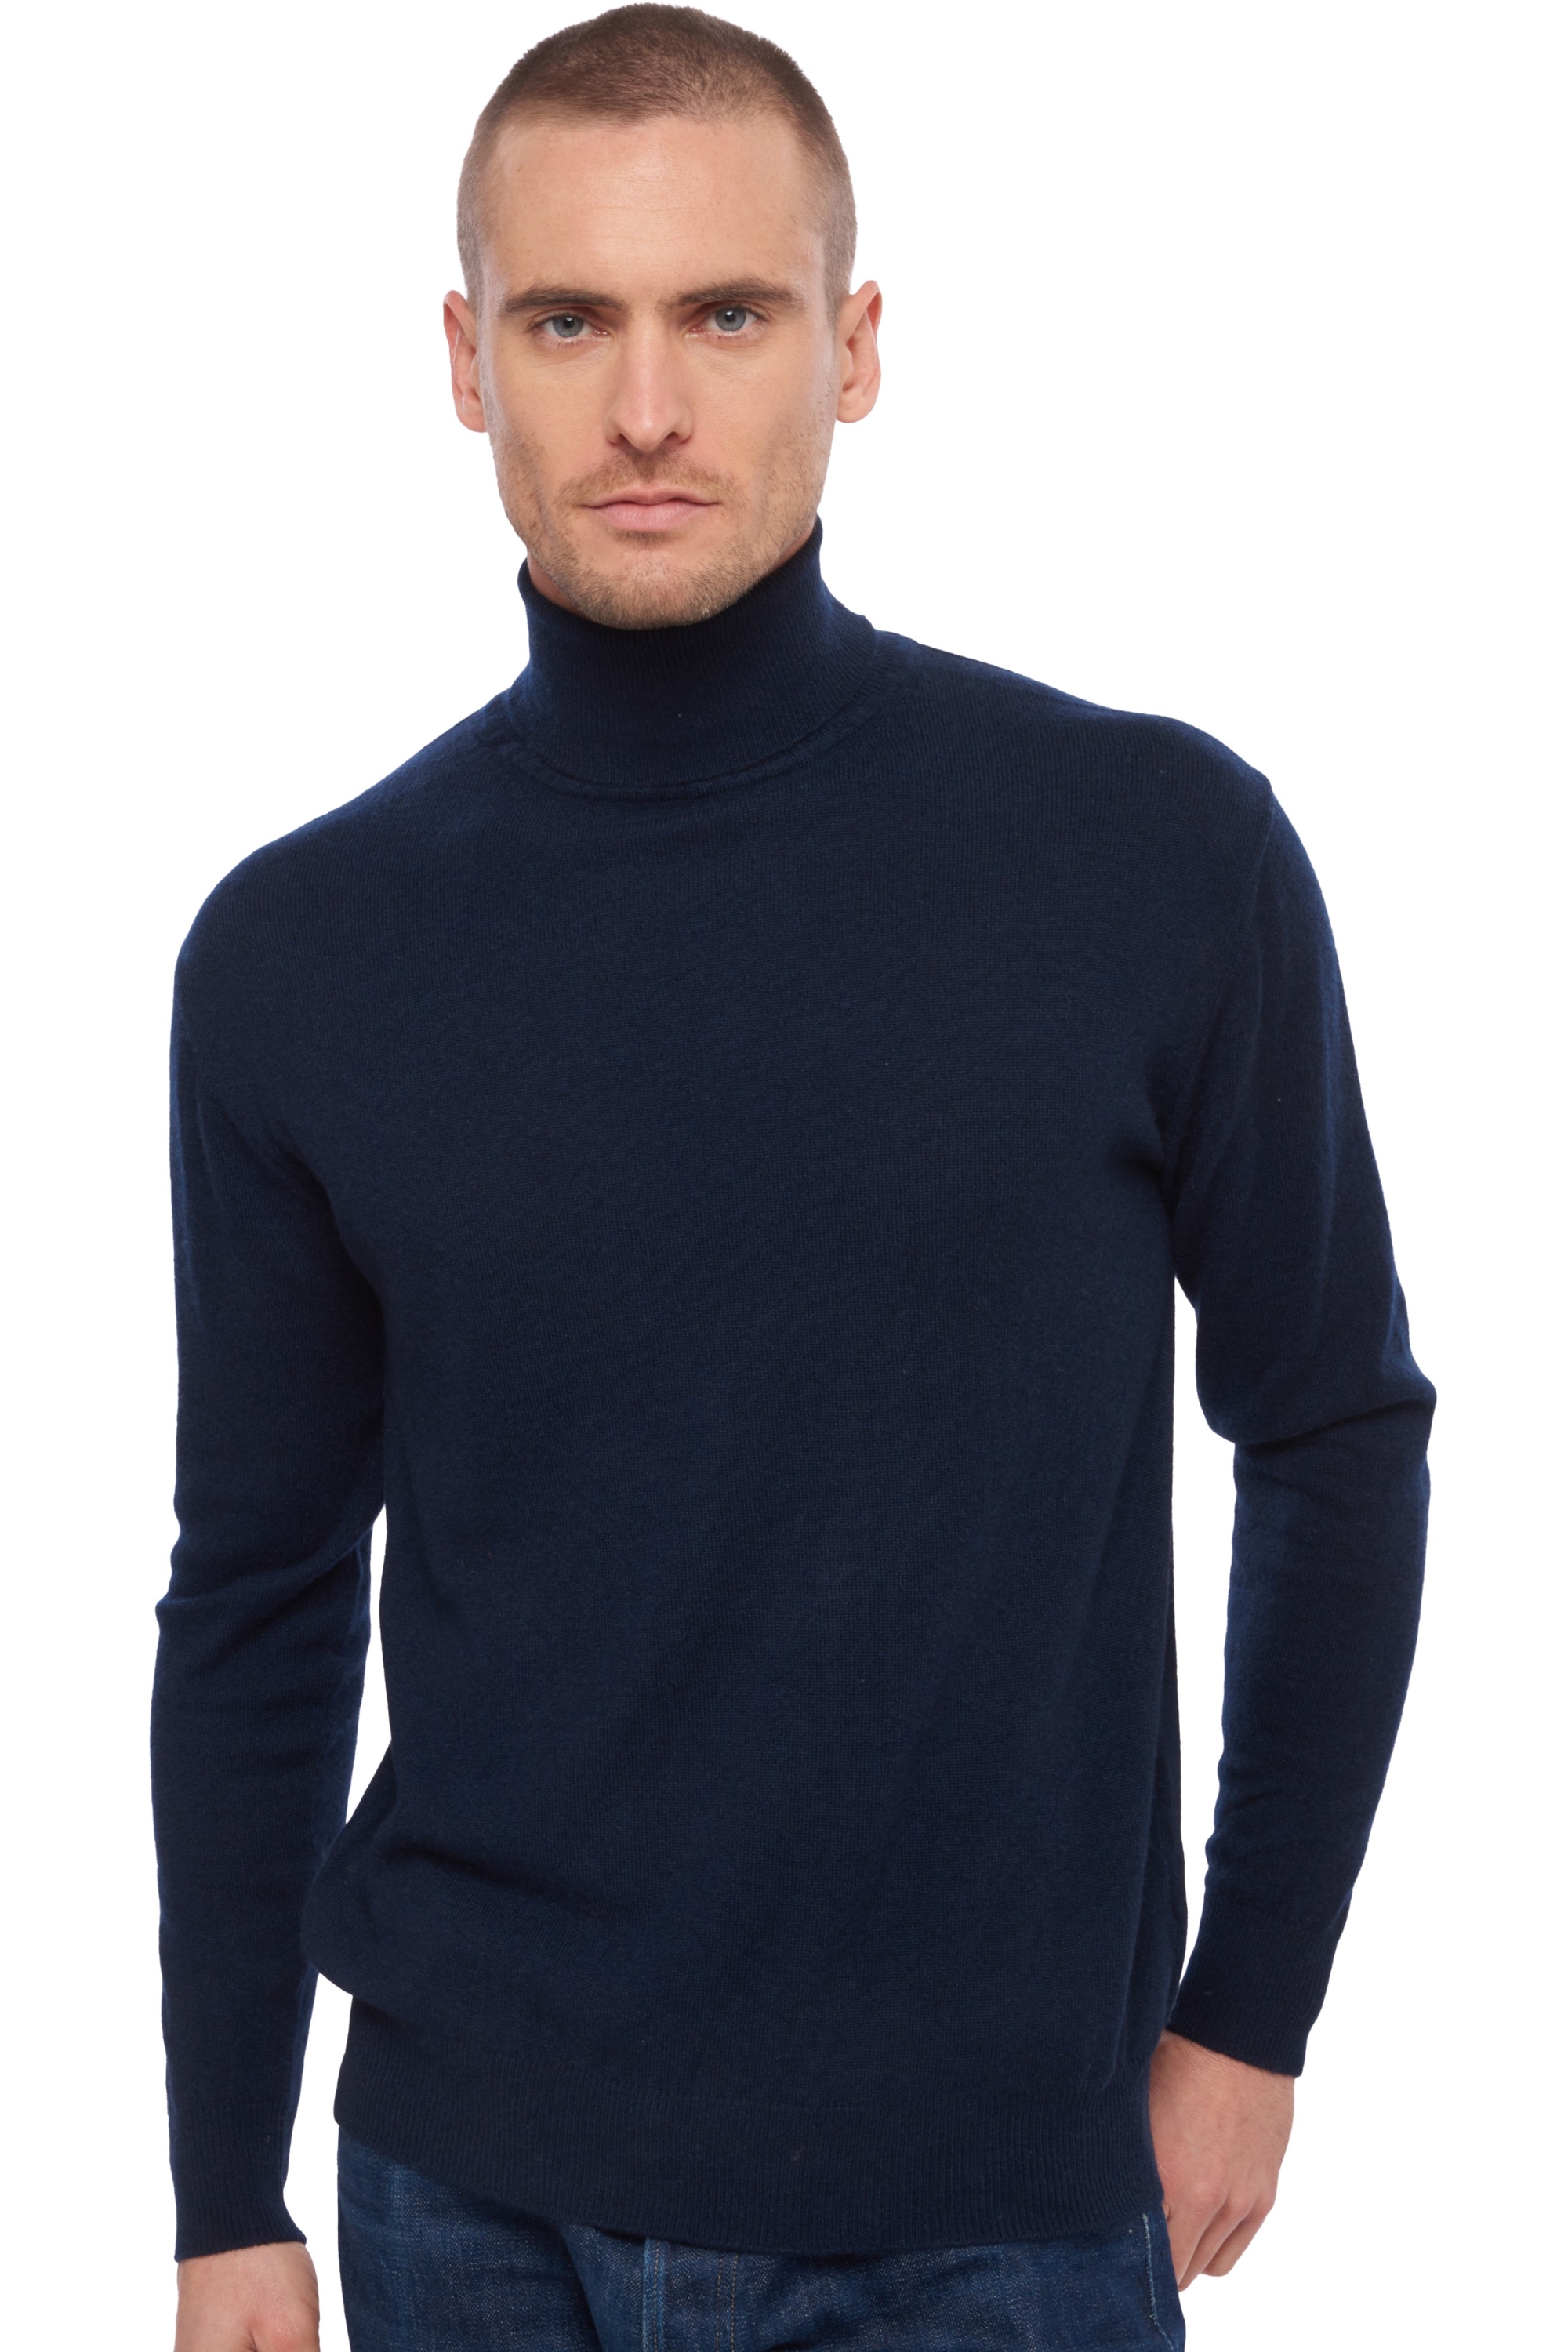 Cachemire pull homme col roule edgar marine fonce m